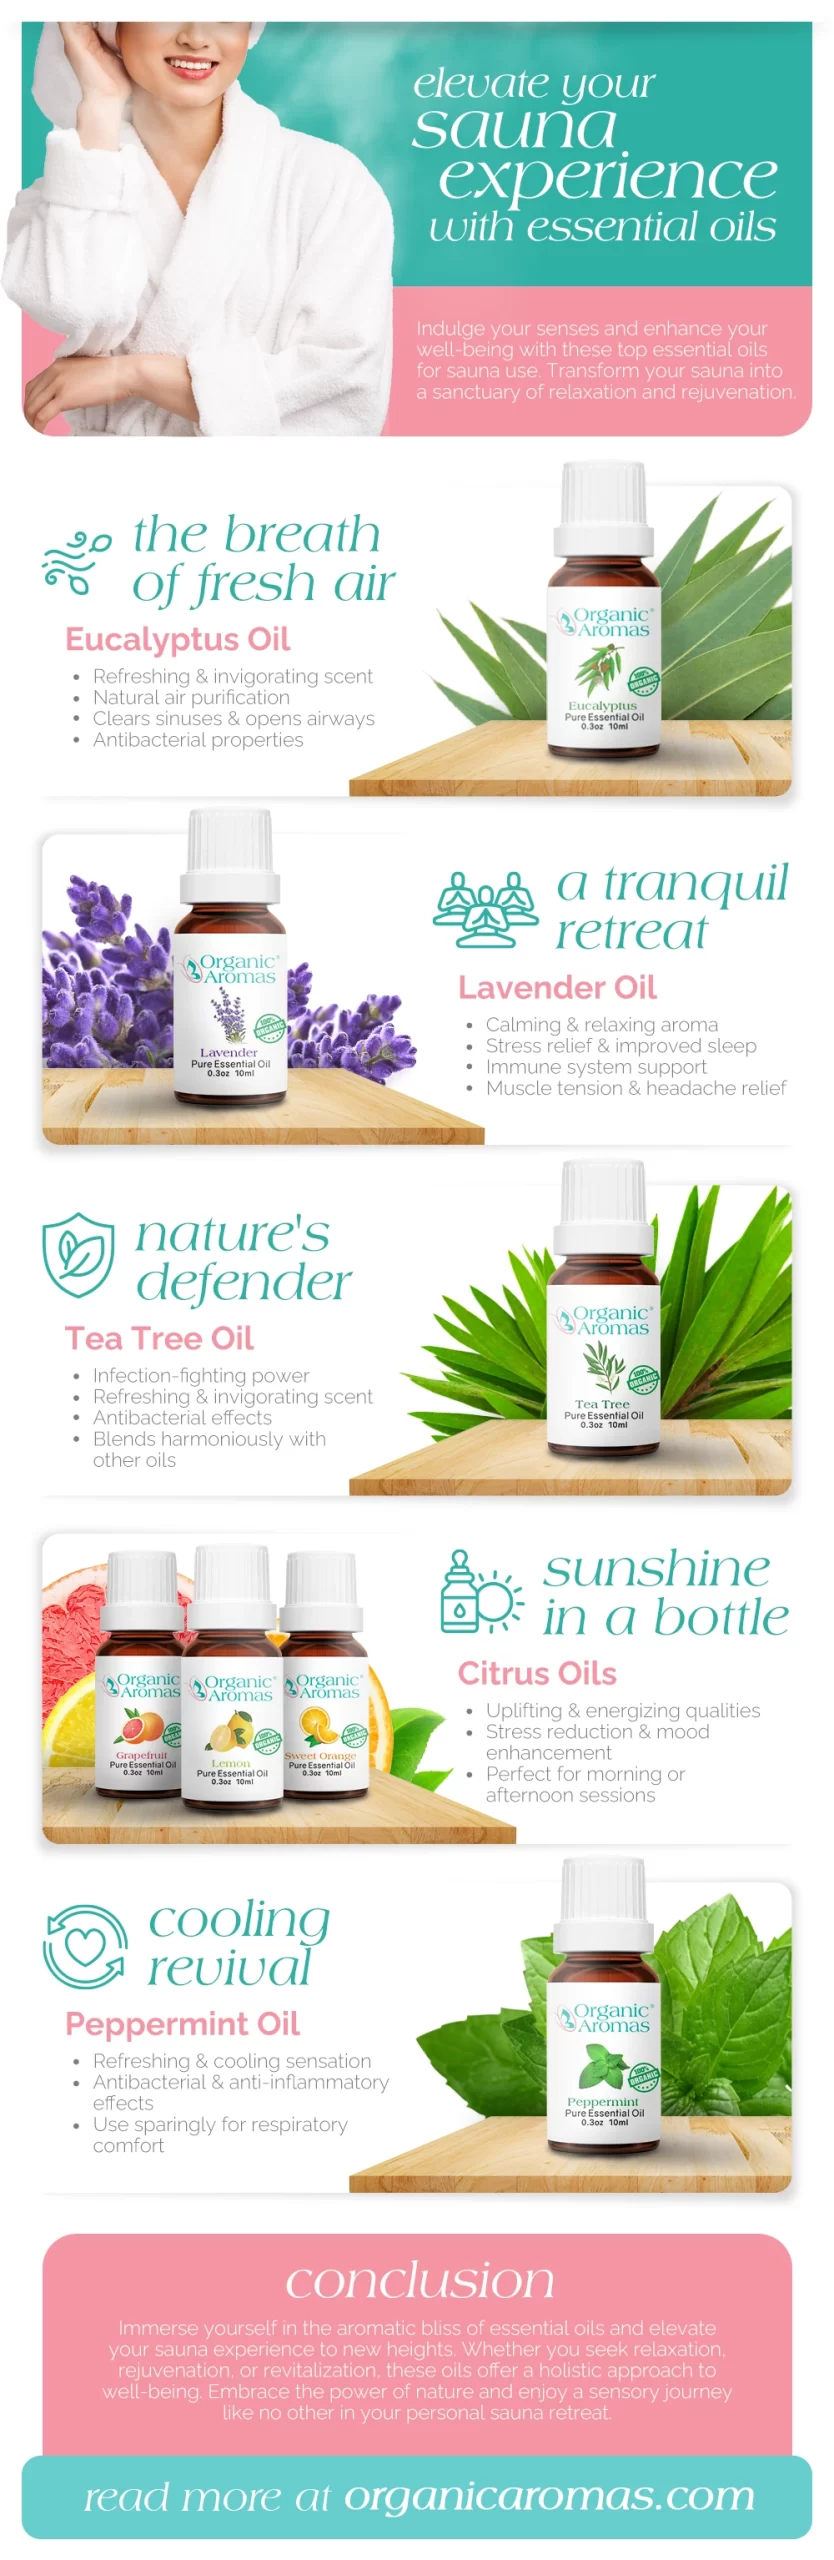 Elevate Your Sauna Experience with Essential Oils Infographic by Organic Aromas